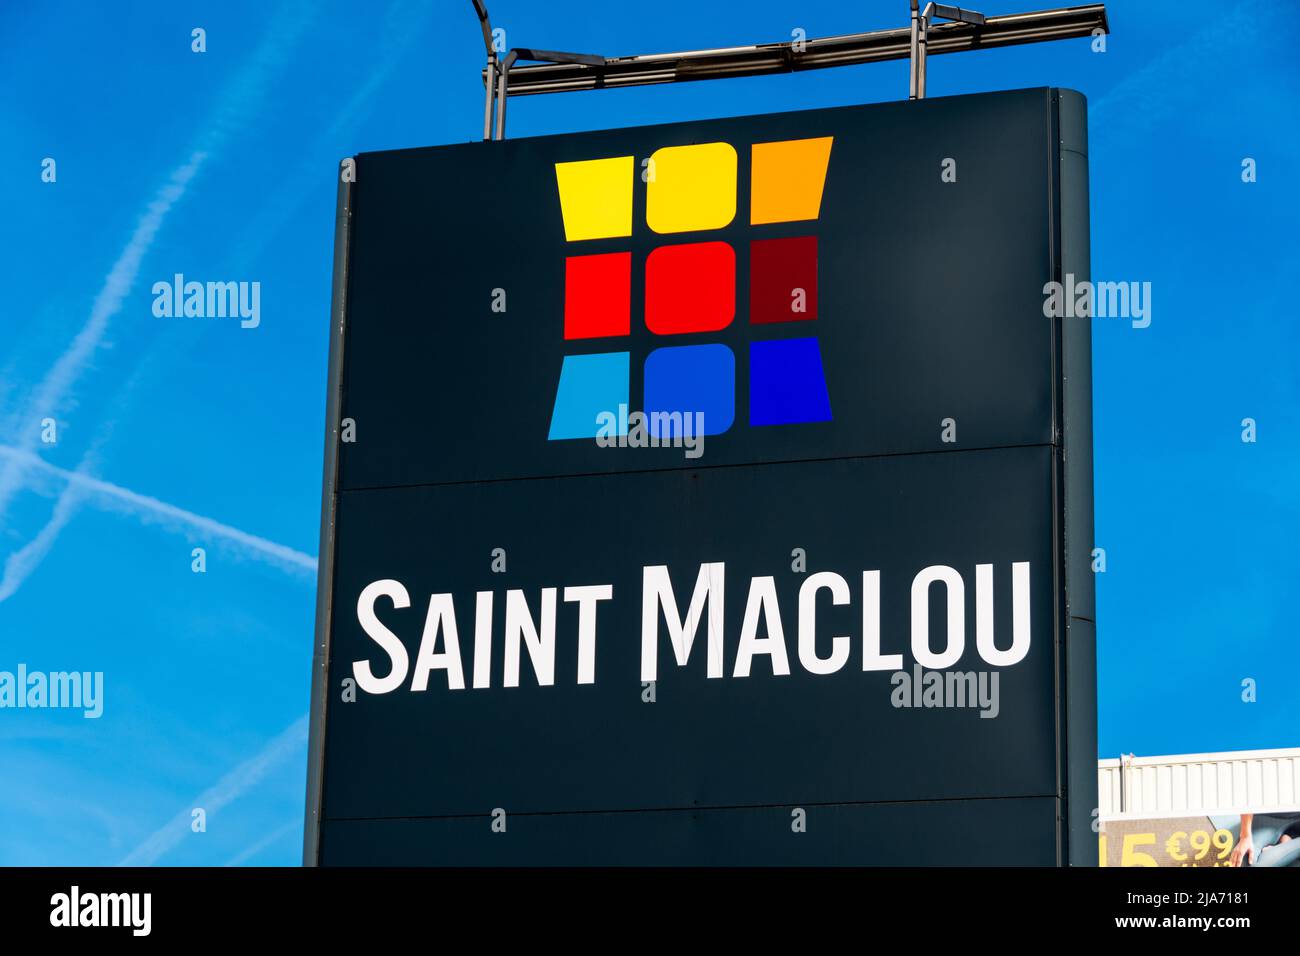 Sign of a Saint-Maclou store. Saint-Maclou is a French company specializing in the decoration of walls, floors and windows Stock Photo